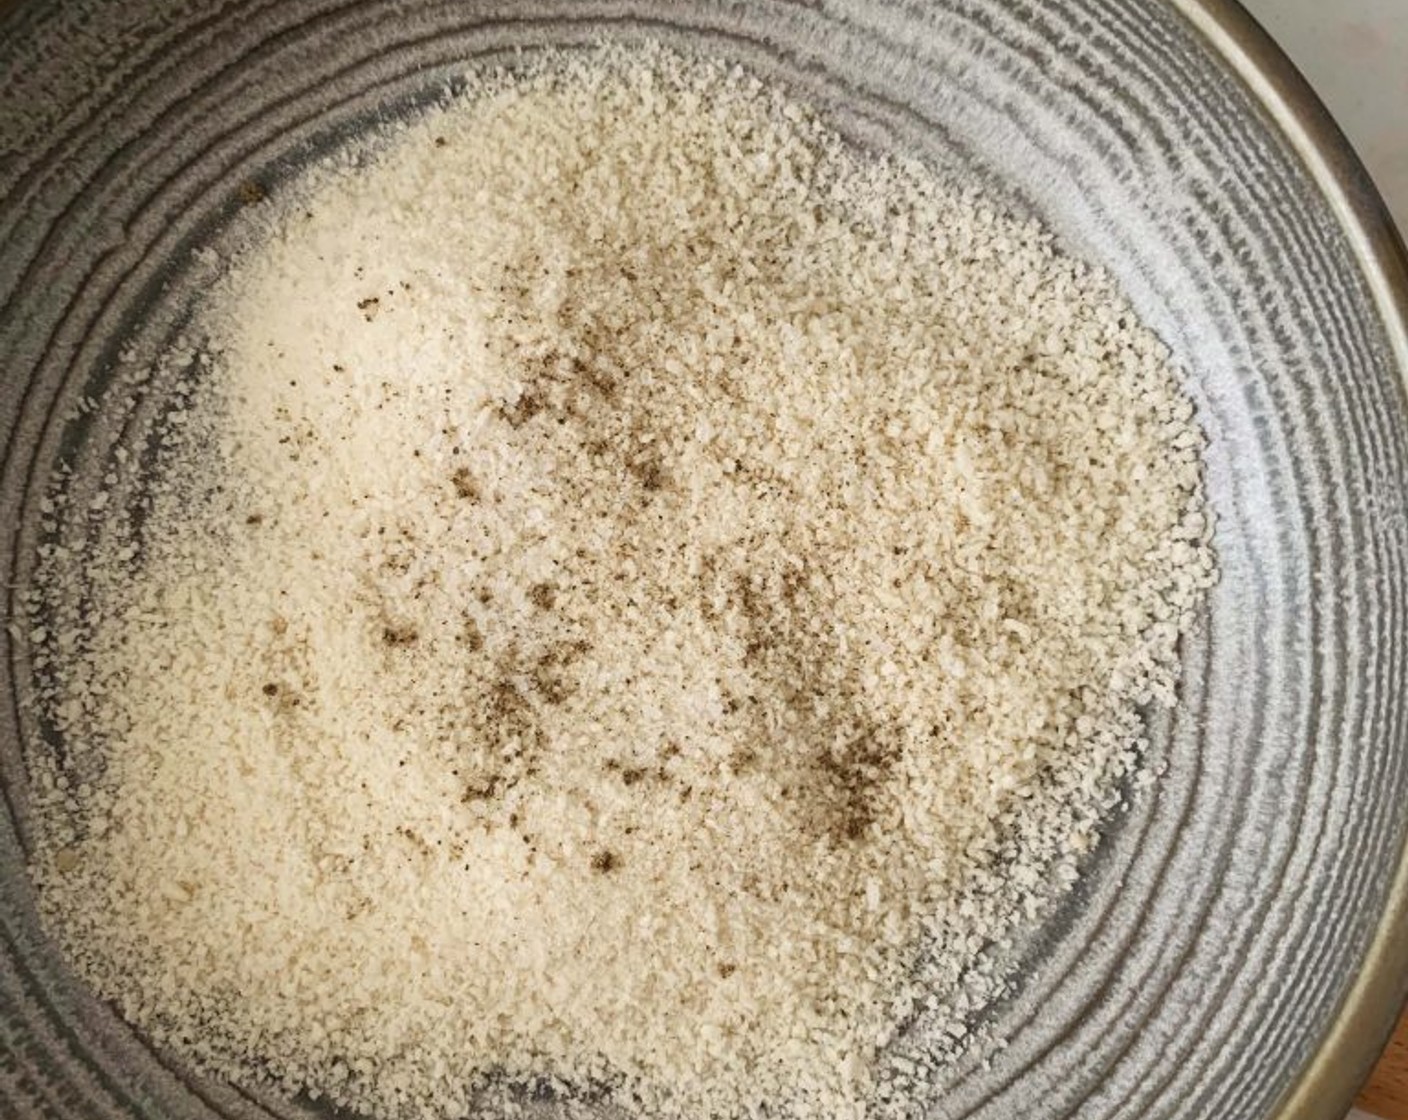 step 2 Next, in a shallow bowl, stir together Breadcrumbs (as needed), Salt (to taste), and Ground Black Pepper (to taste).